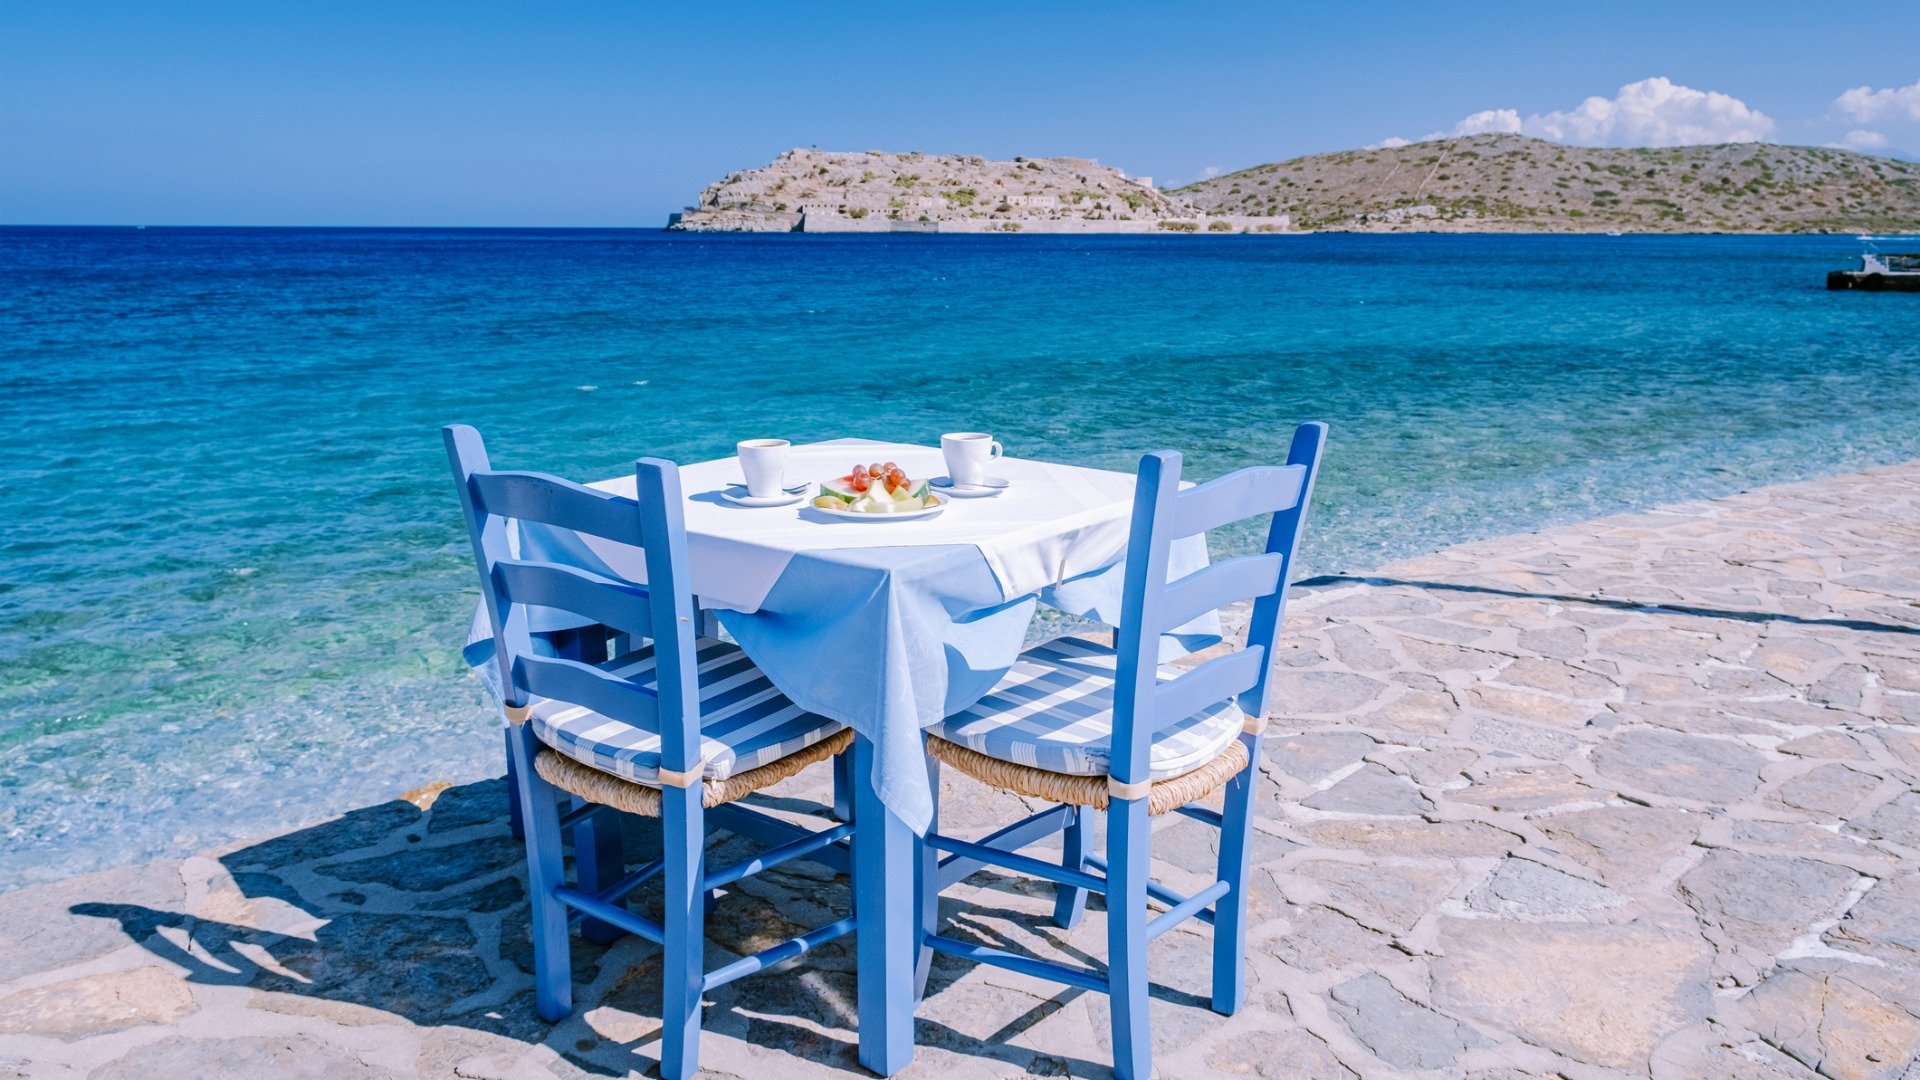 This image shows a blue table with blue chairs by the sea. 